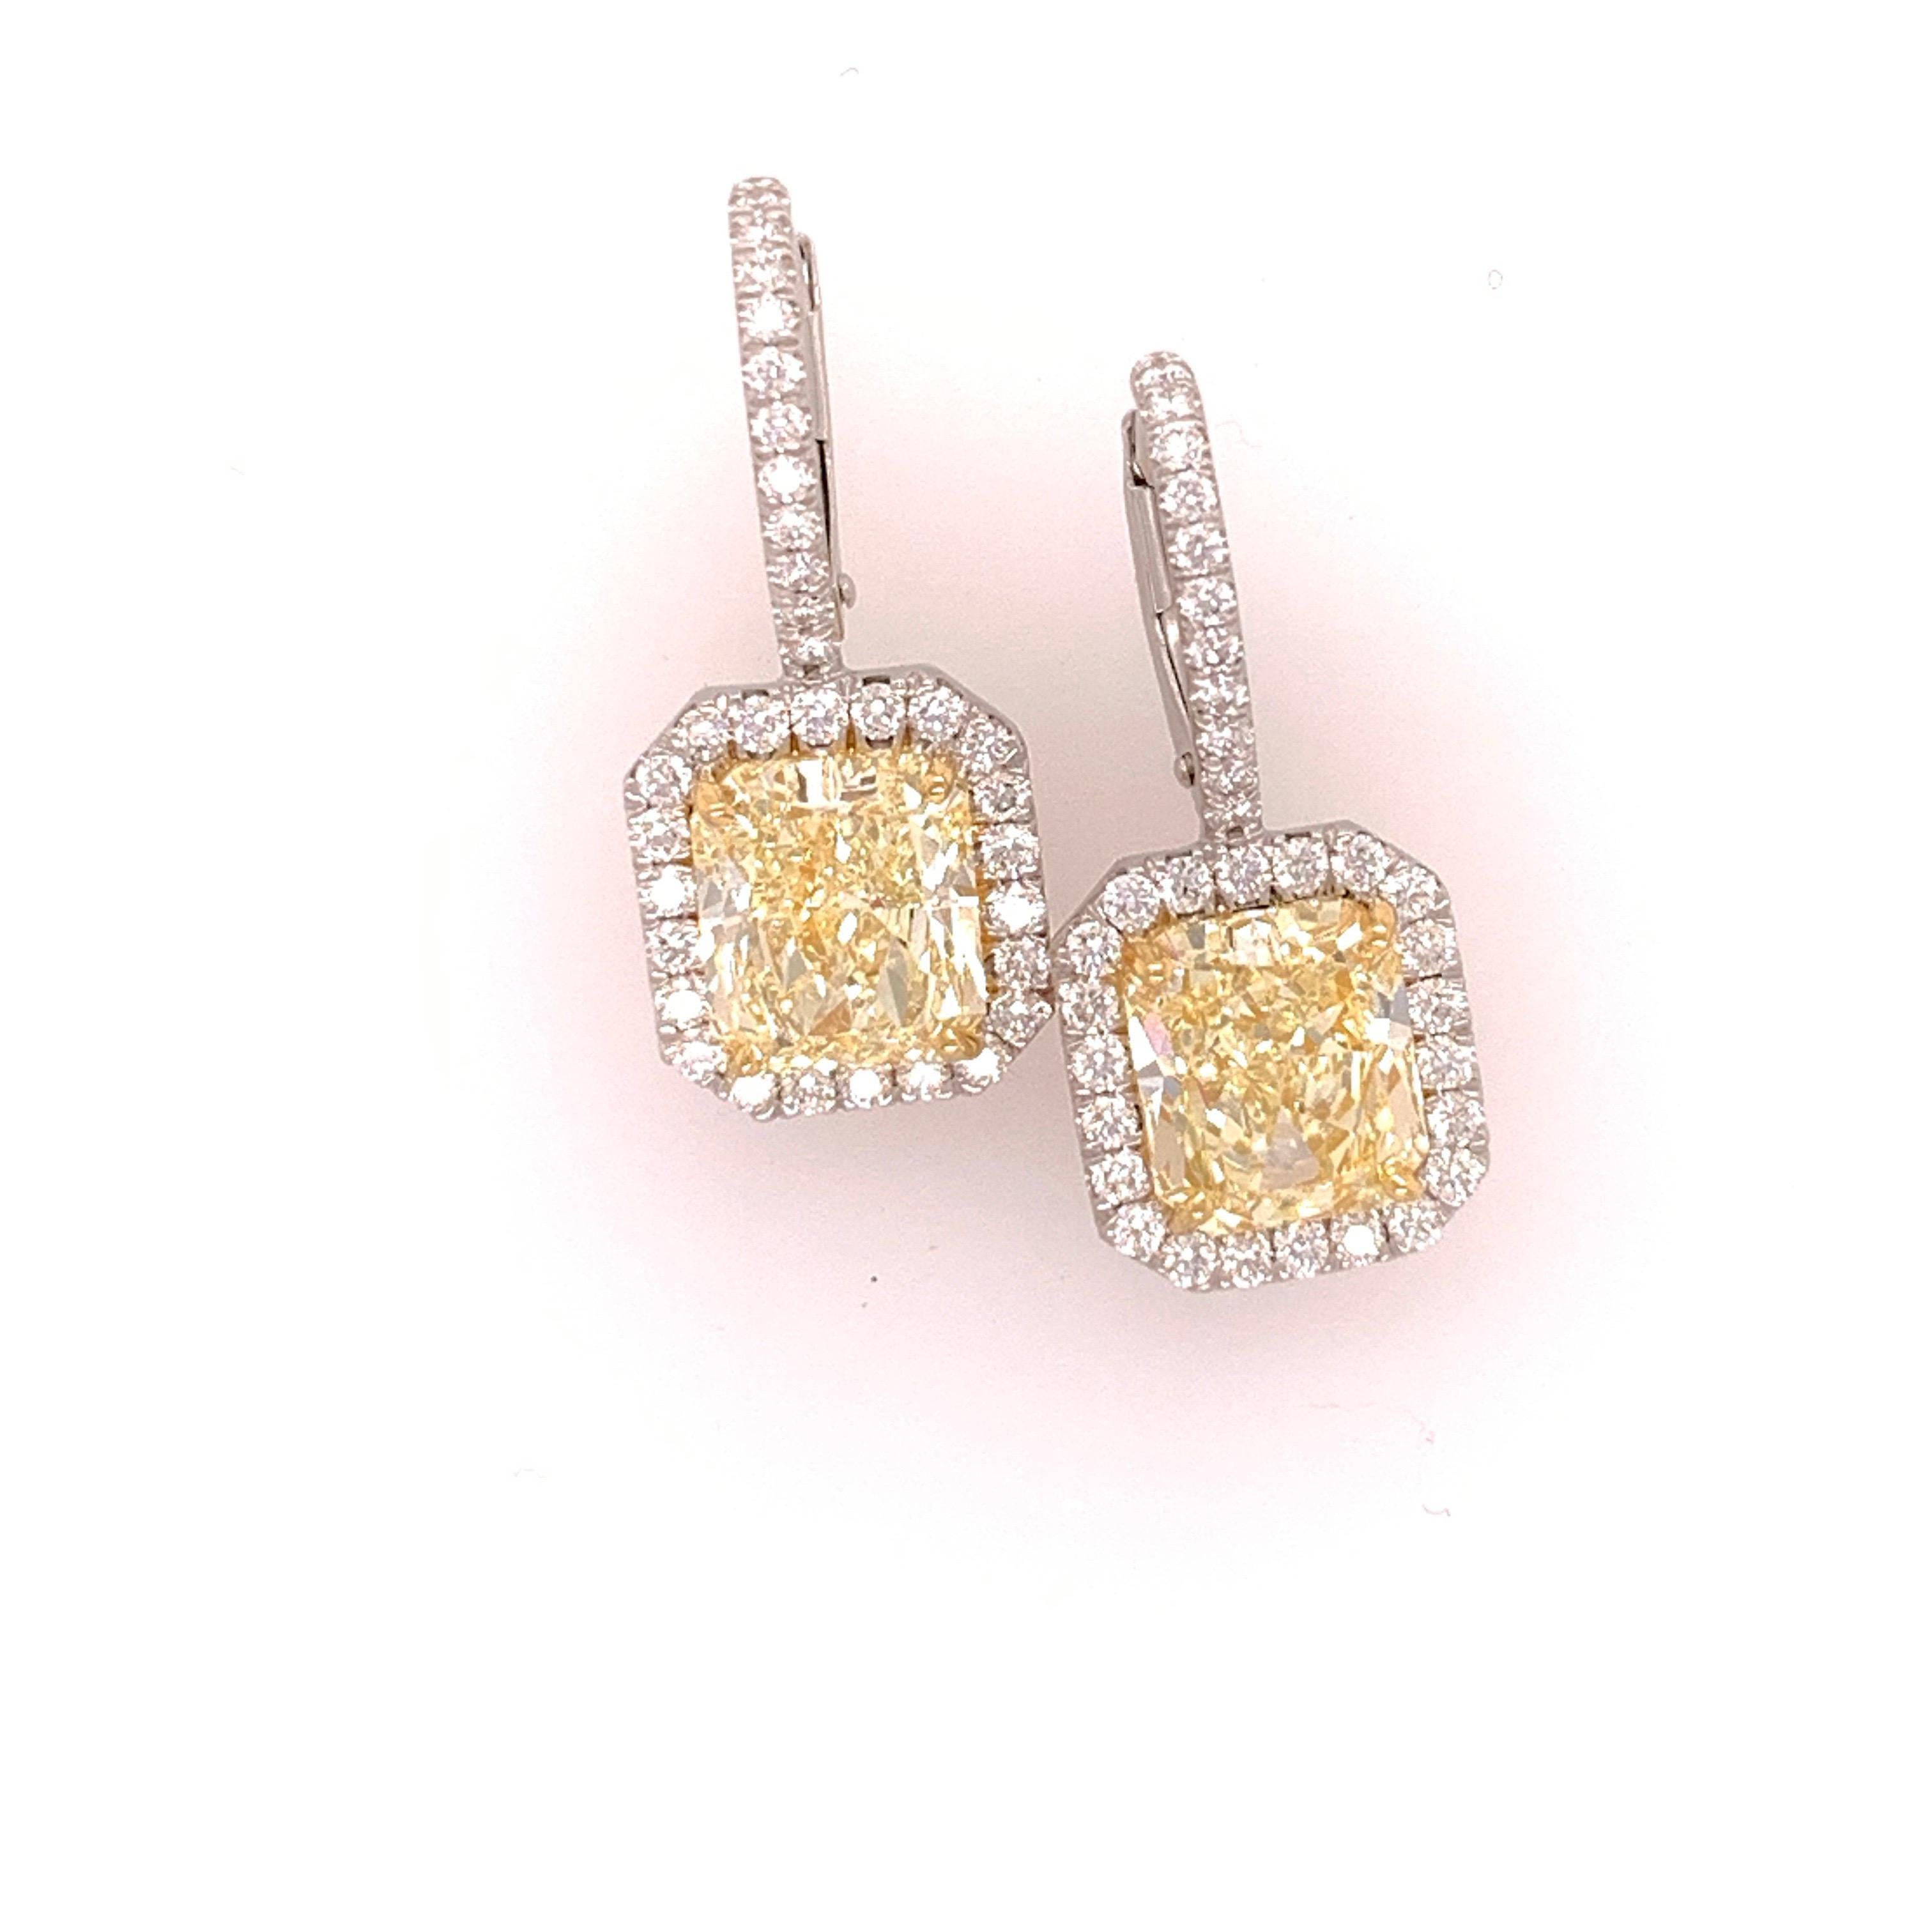 Platinum and 18k fancy light yellow Radiant Cut Diamonds, GIA certified. The first radiant is 2.46 carats, vvs1, no fluorescence. The second radiant is 2.53 carats, vvs2, faint fluorescence. 

Both stones measure over 8.1 x 7 mm

The mountings are